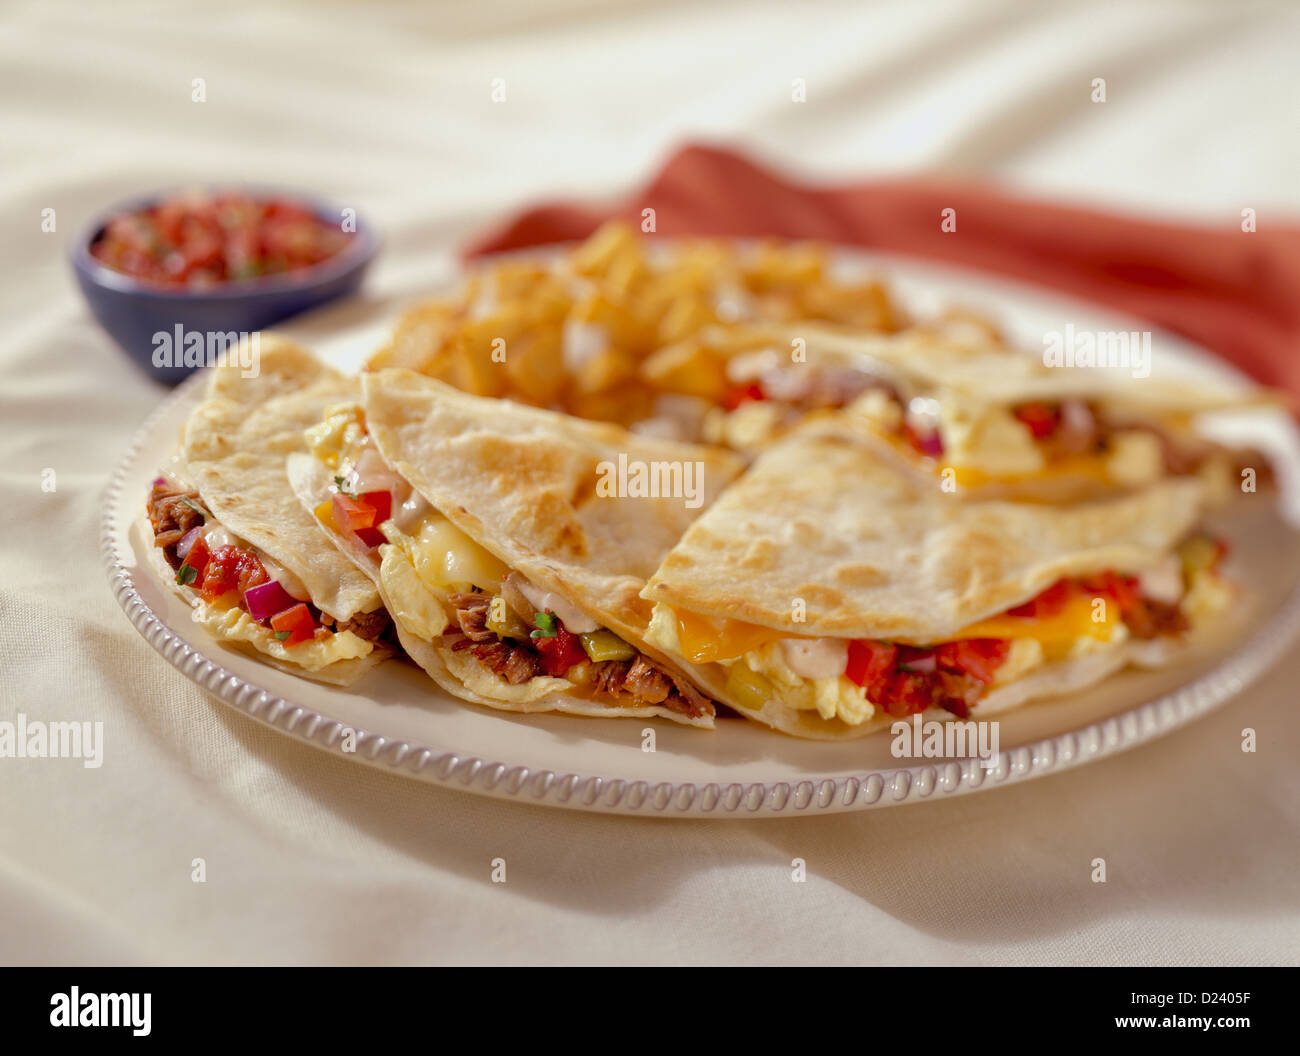 A breakfast quesadilla stuffed with eggs, bacon, tomatoes and melted cheese served with potatoes and salsa Stock Photo